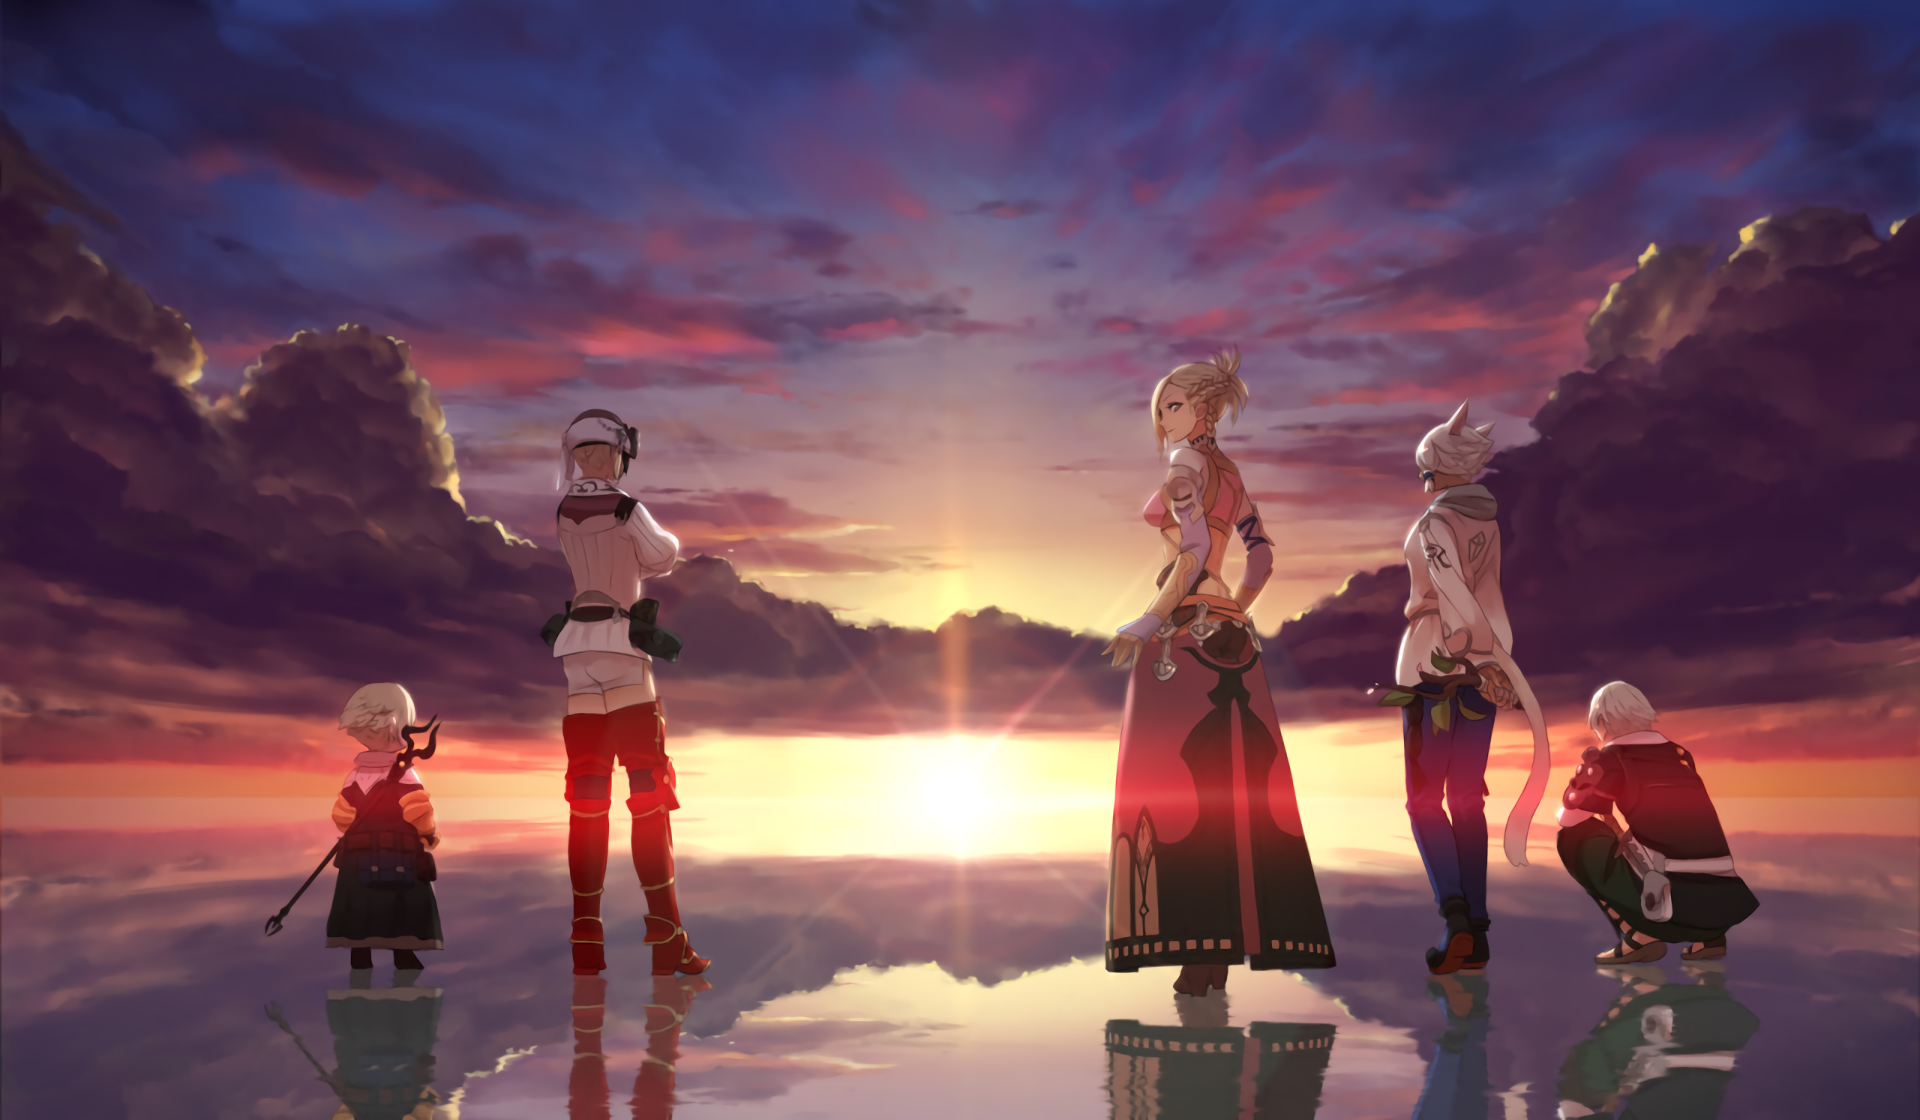 Final Fantasy XIV Wallpapers, Pictures, Images